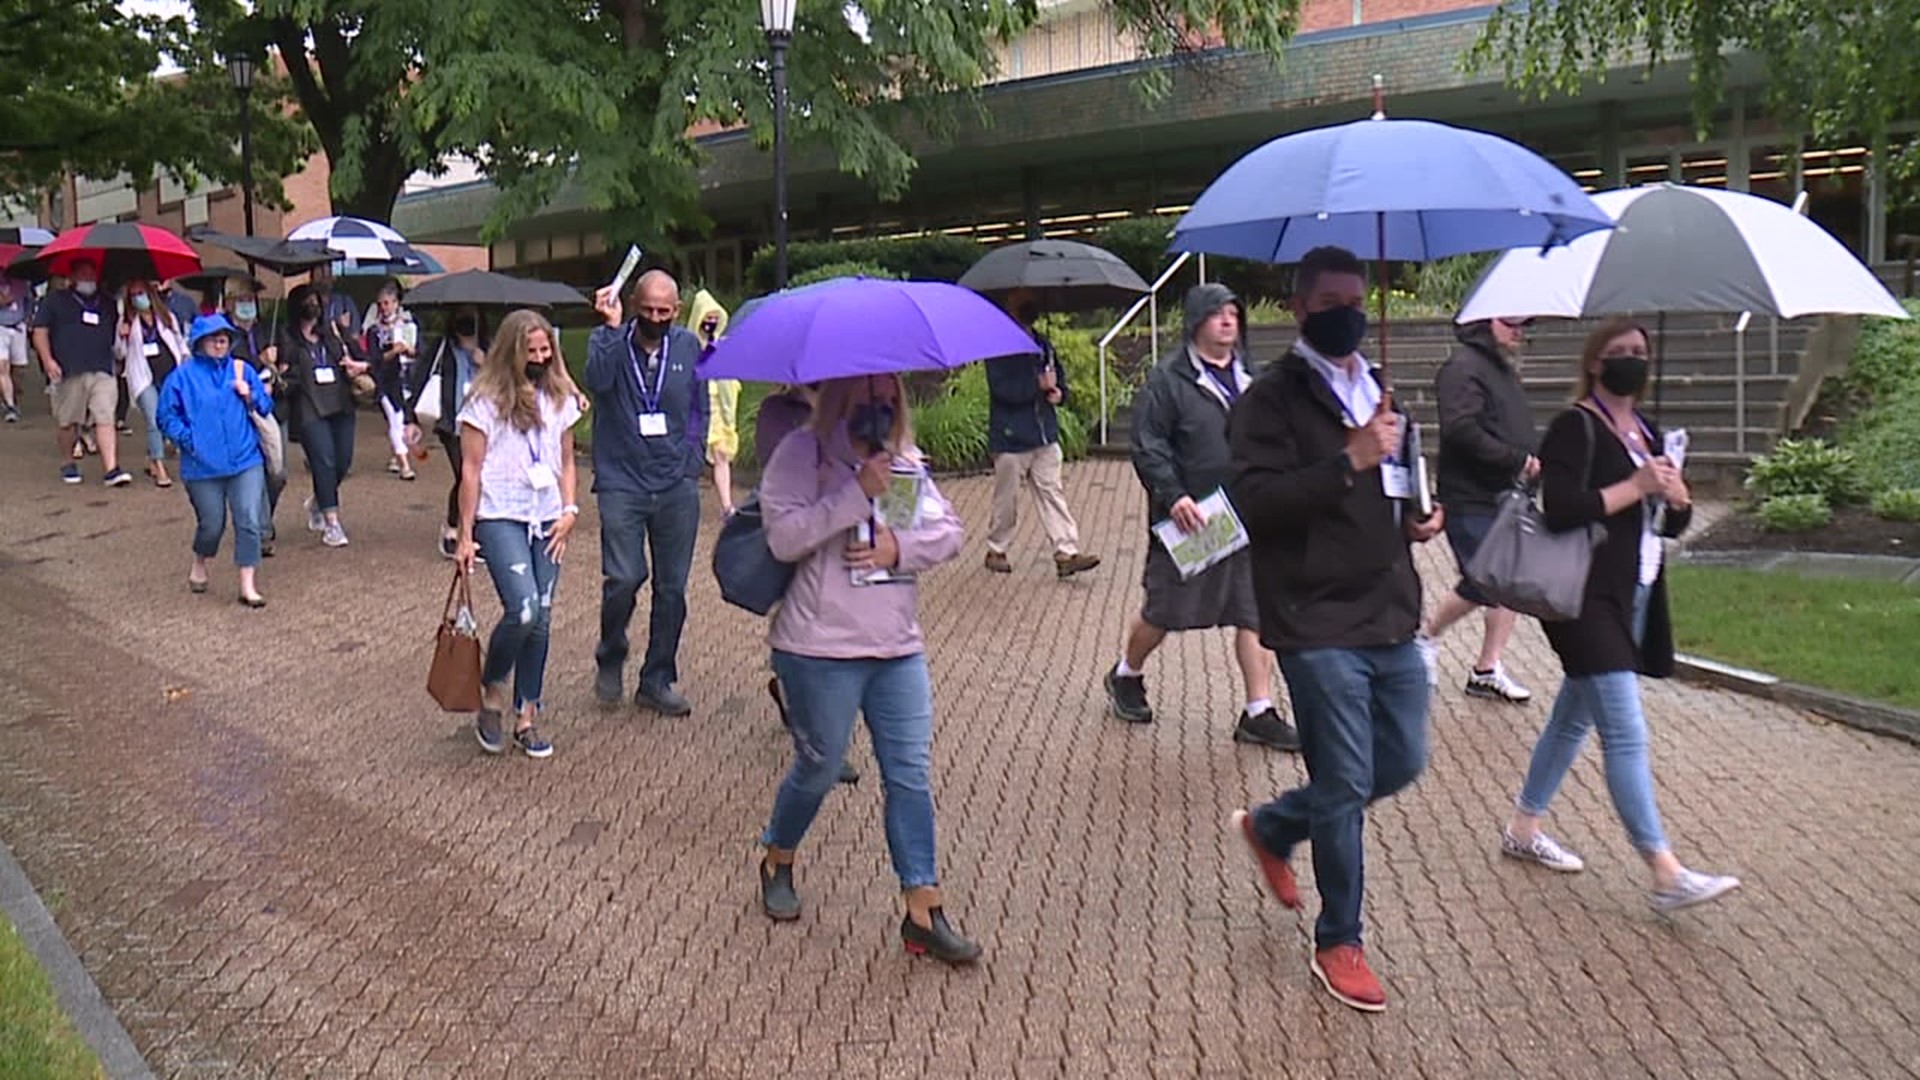 The University of Scranton invited its newest students to campus this week for orientation, something school officials weren't sure would happen a few months ago.